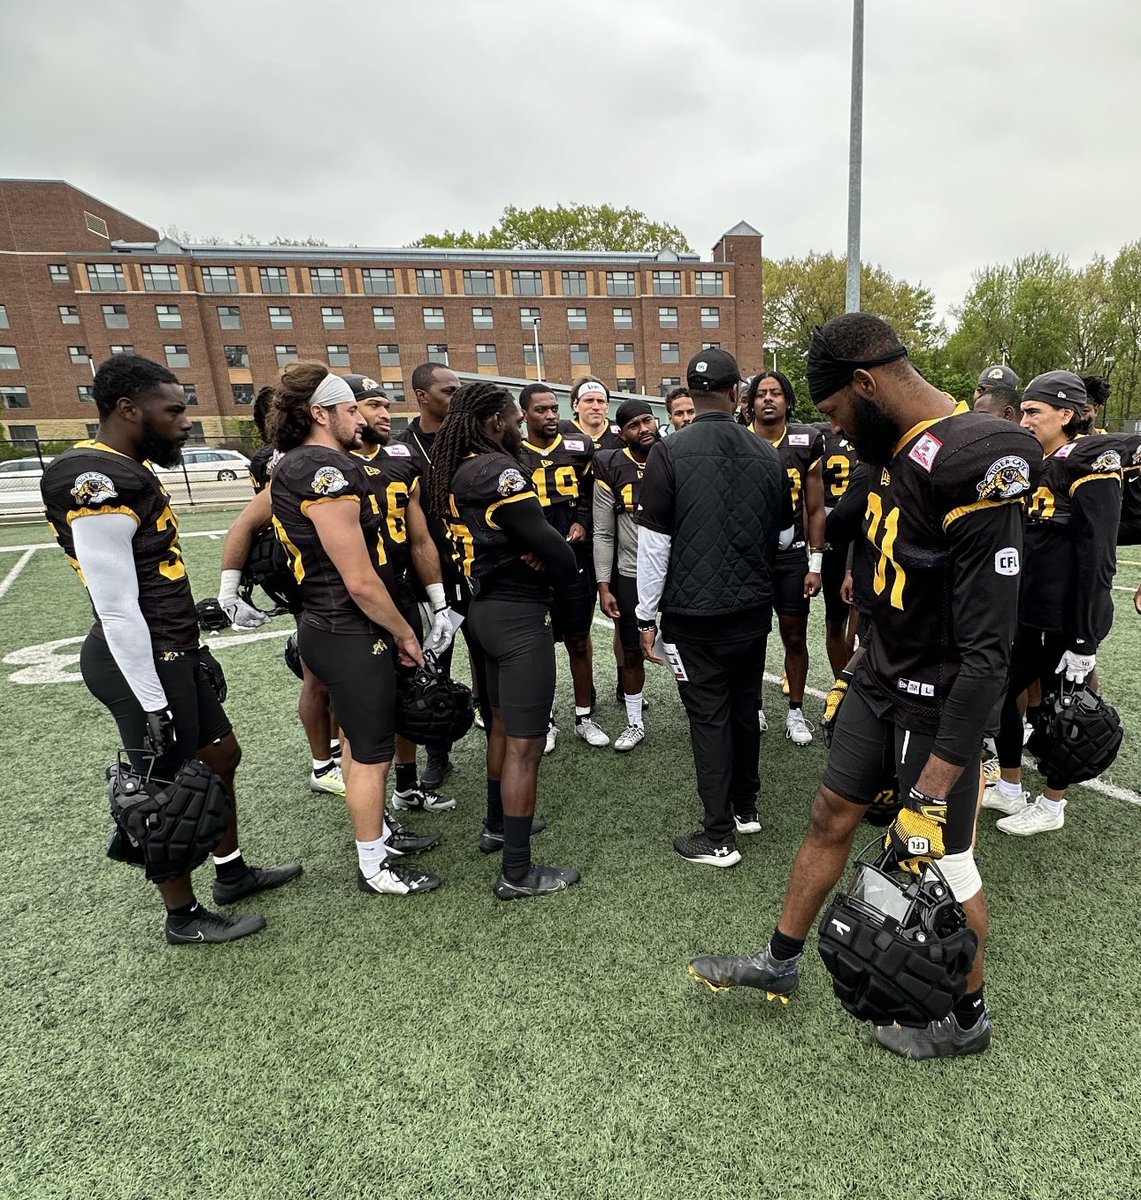 2️⃣0️⃣2️⃣4️⃣ Hamilton Tiger-Cats CFL Training Camp‼️#TheHammer @Ticats Great Experience, Great Coaches, Great Players, Great Organization‼️ Thank you for the opportunity of learning & also bringing back more knowledge of how to mold boys into men. #GodIsAmazing